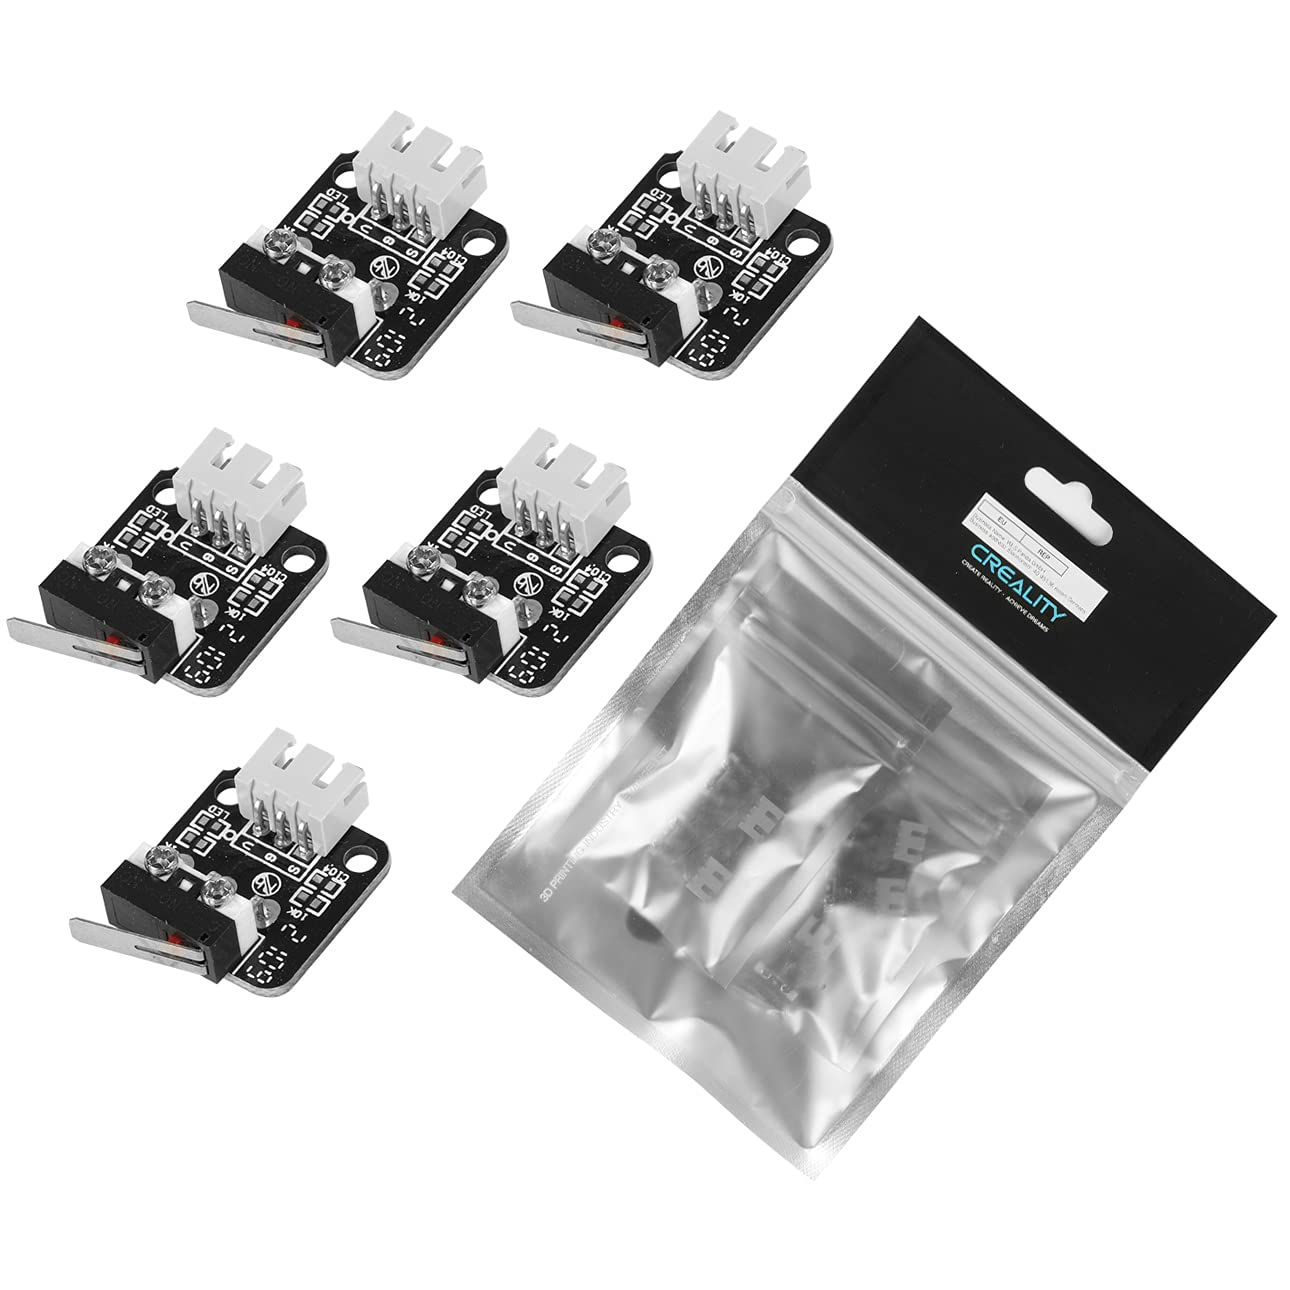 5pcs Creality 3D® Mechanical End Stop Limit Switch for Ender / CR Series 3D Printers